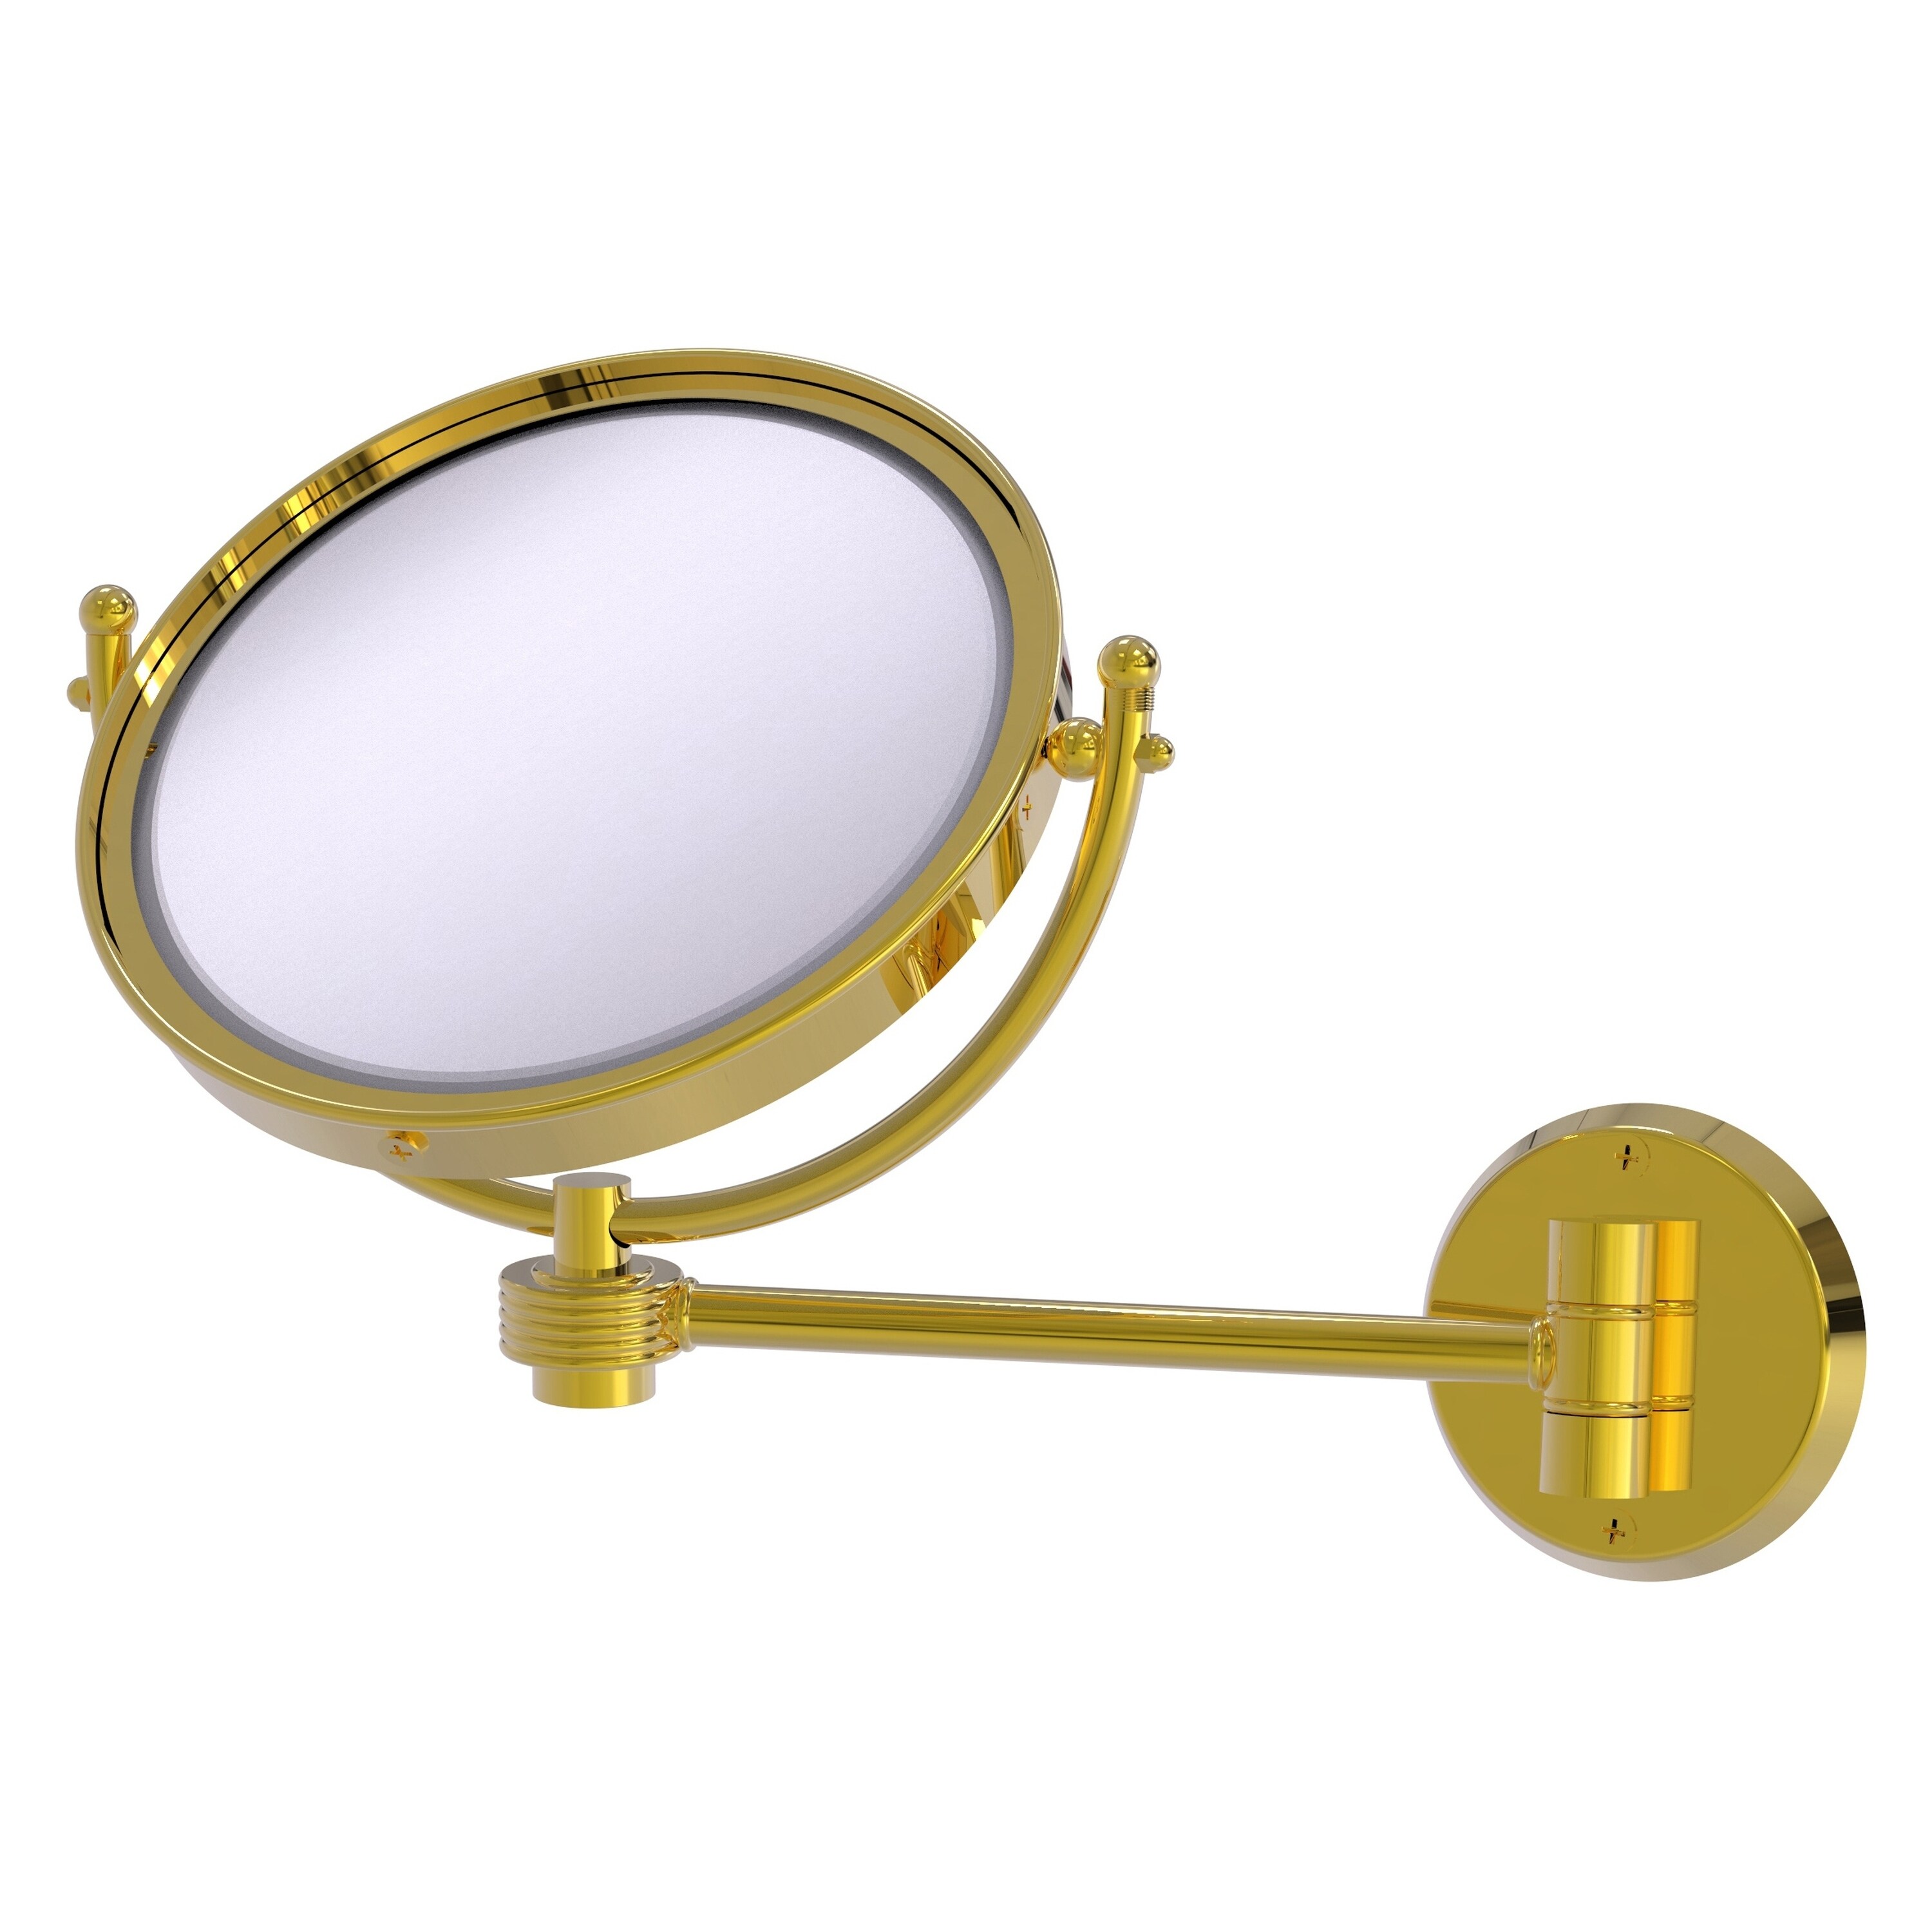 8-in x 10-in Polished Silver Double-sided 3X Magnifying Wall-mounted Vanity Mirror | - Allied Brass WM-5G/3X-PB